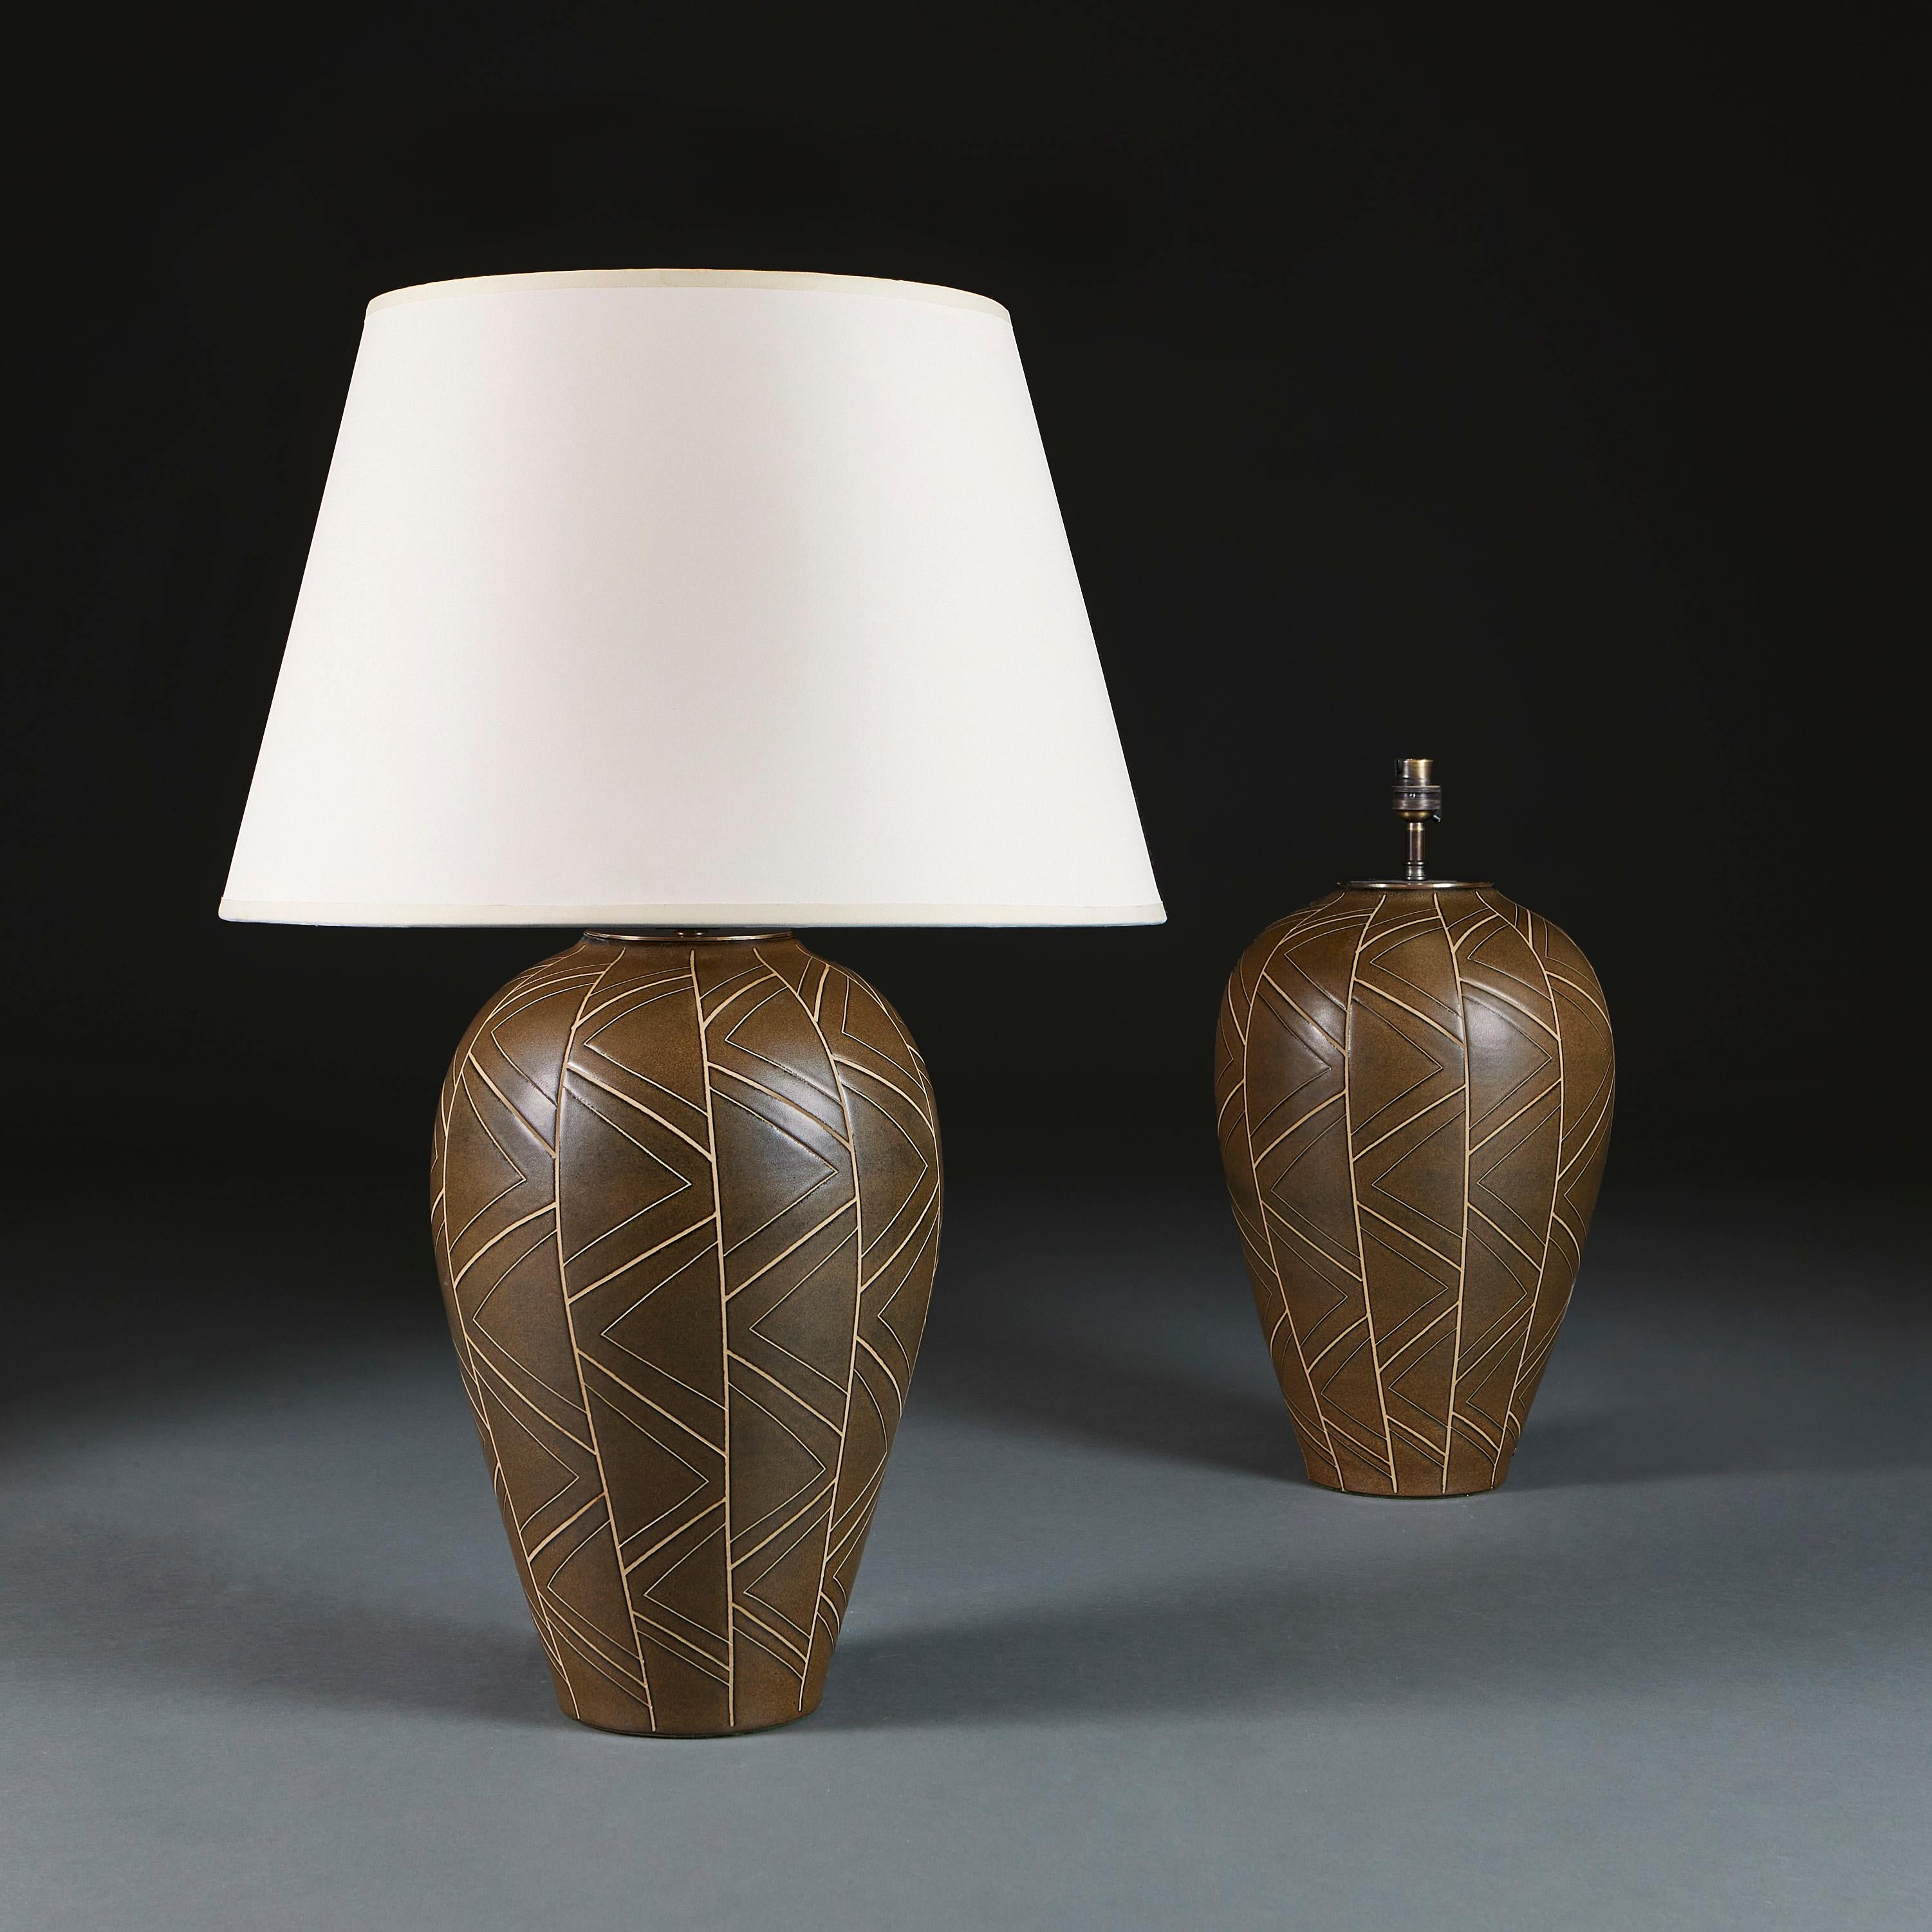 England, circa 1940

A pair of mid century art pottery lamps of large scale, with geometric scraffito motives to the bronze glaze.

Height 38.00cm
Height with shade 69.00cm
Diameter of base 12.00cm.

Please note: This is currently wired for the UK